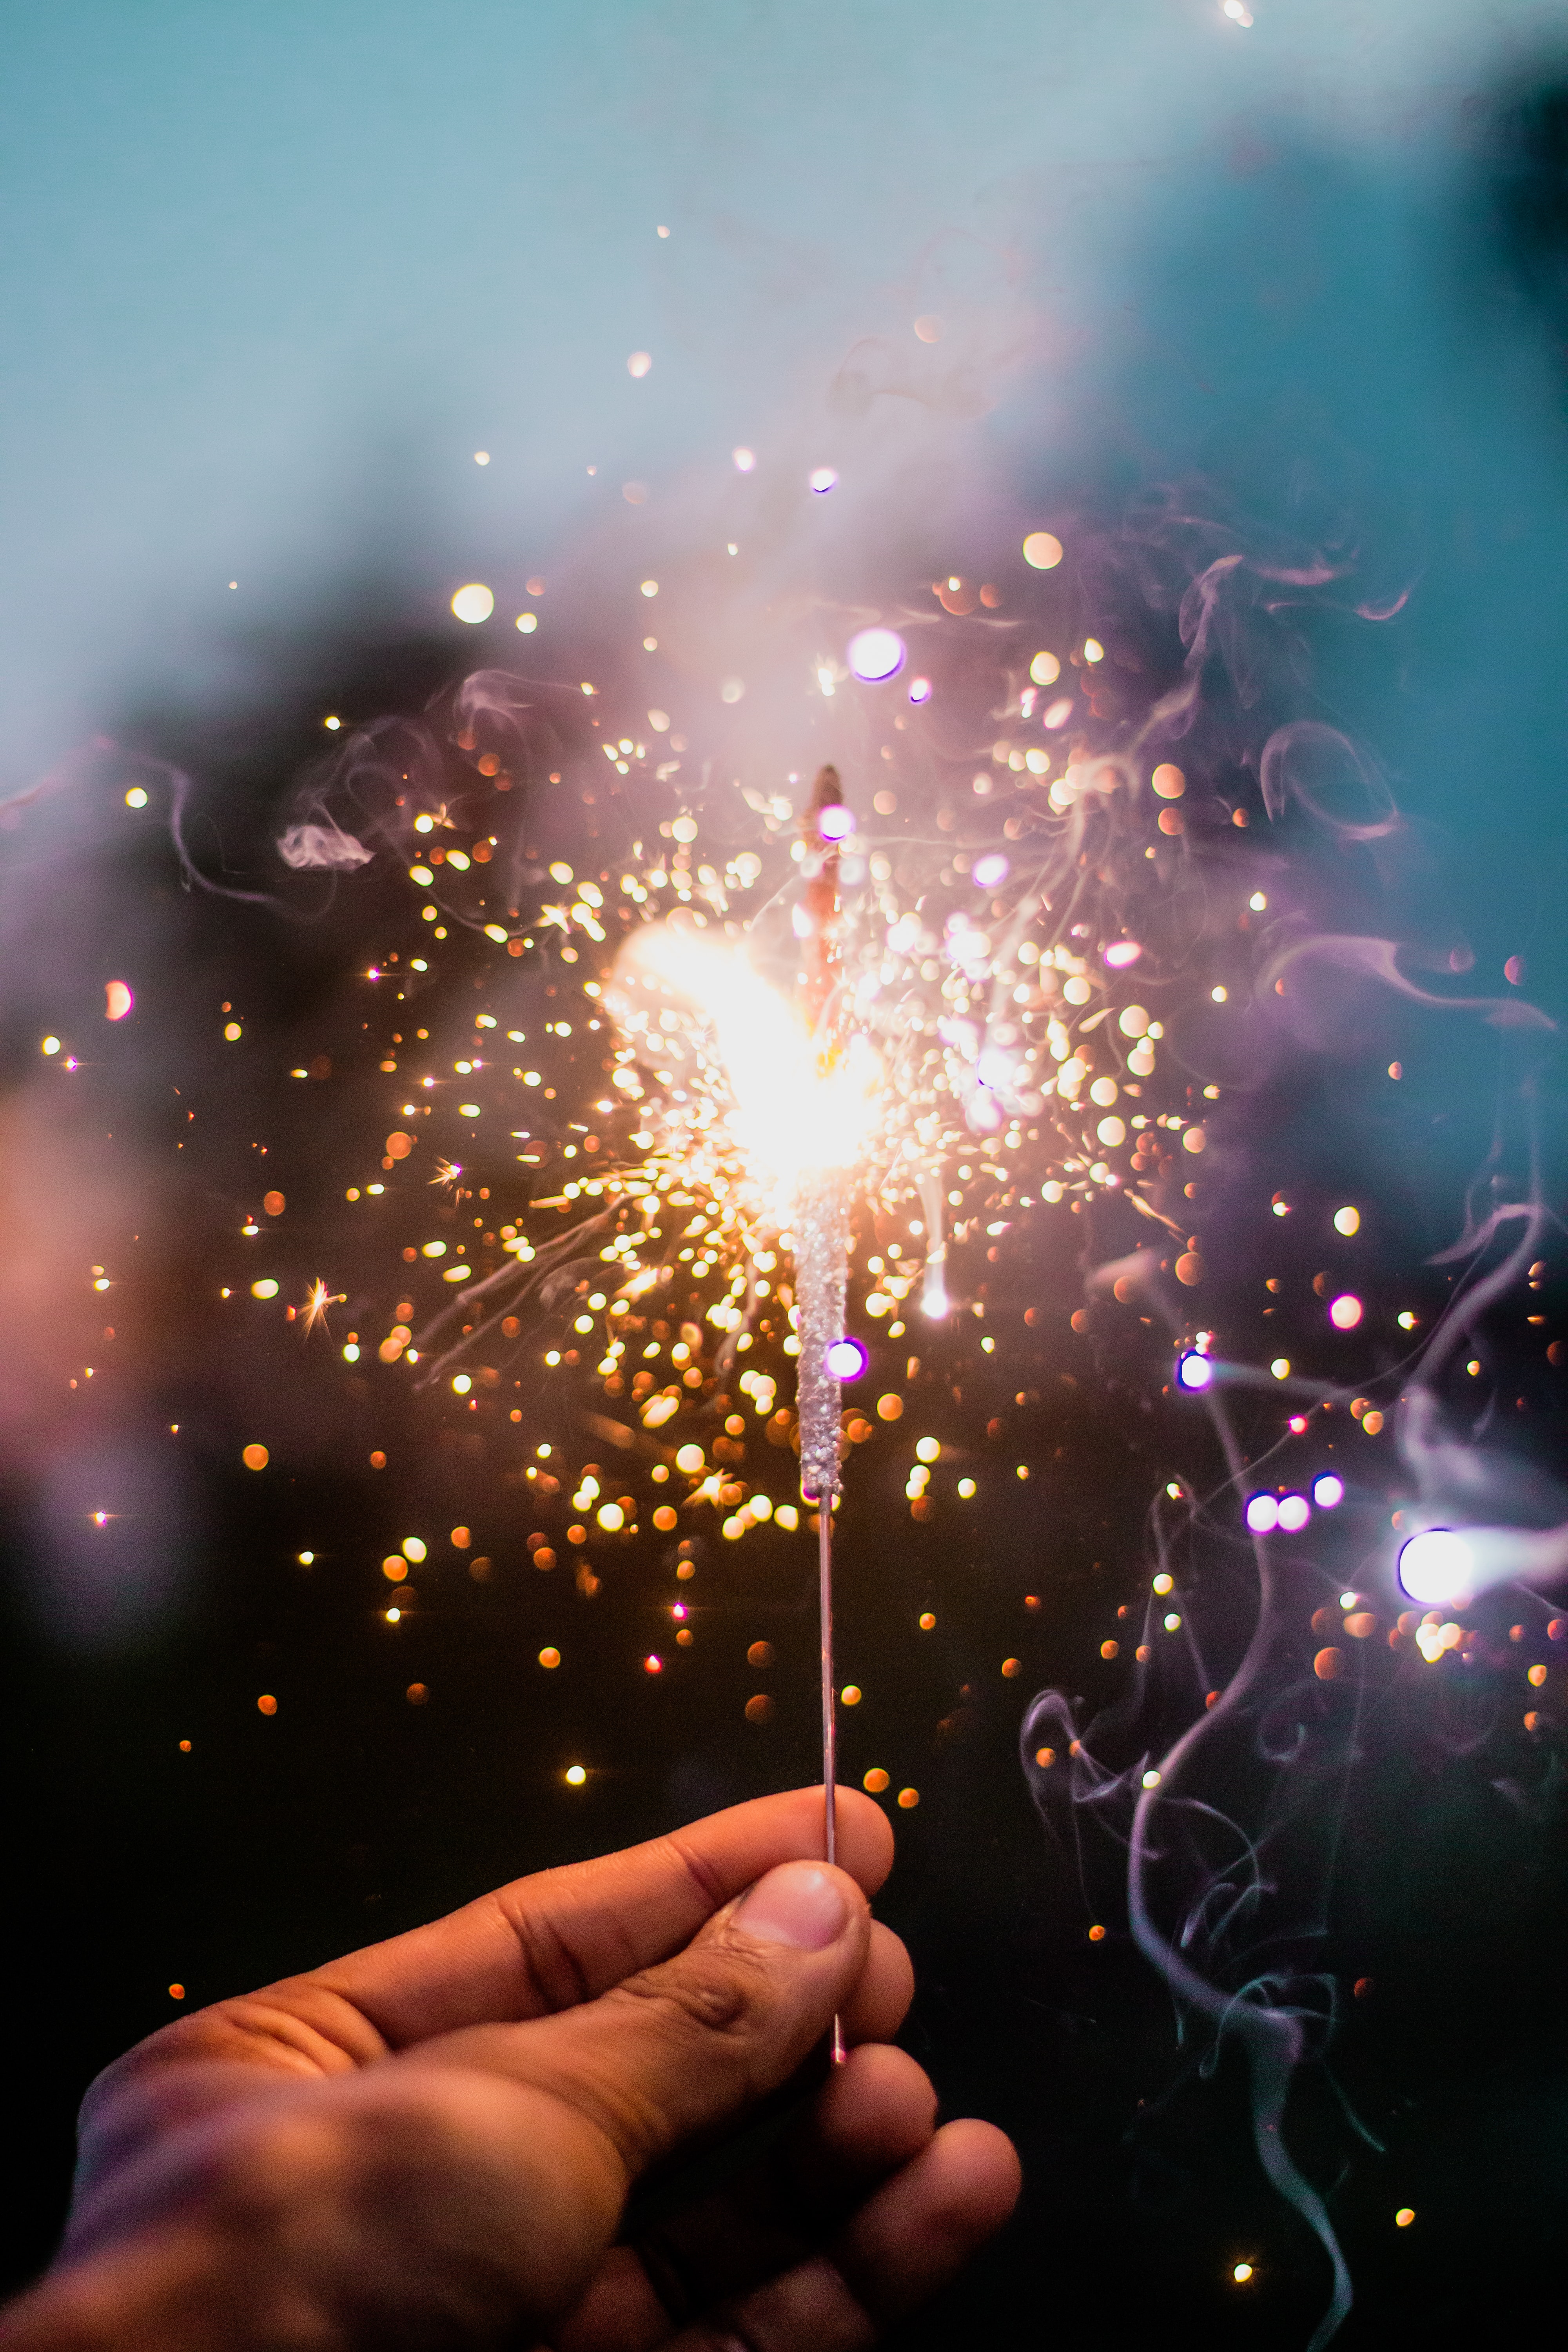 Cool Backgrounds smoke, miscellanea, miscellaneous, sparklers Sparks